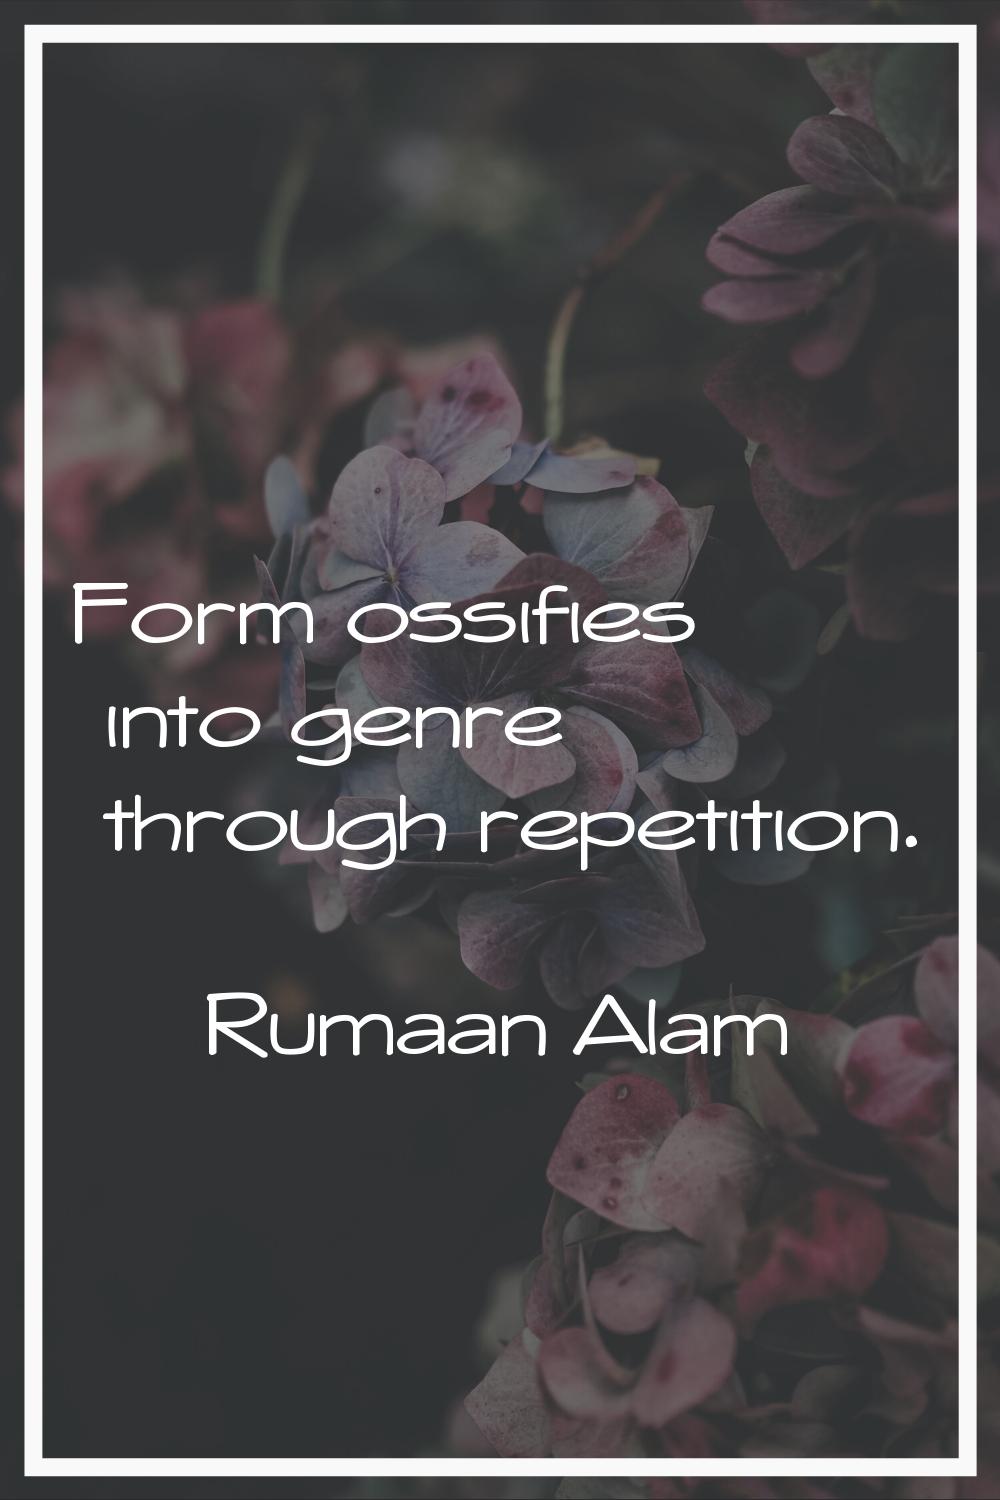 Form ossifies into genre through repetition.